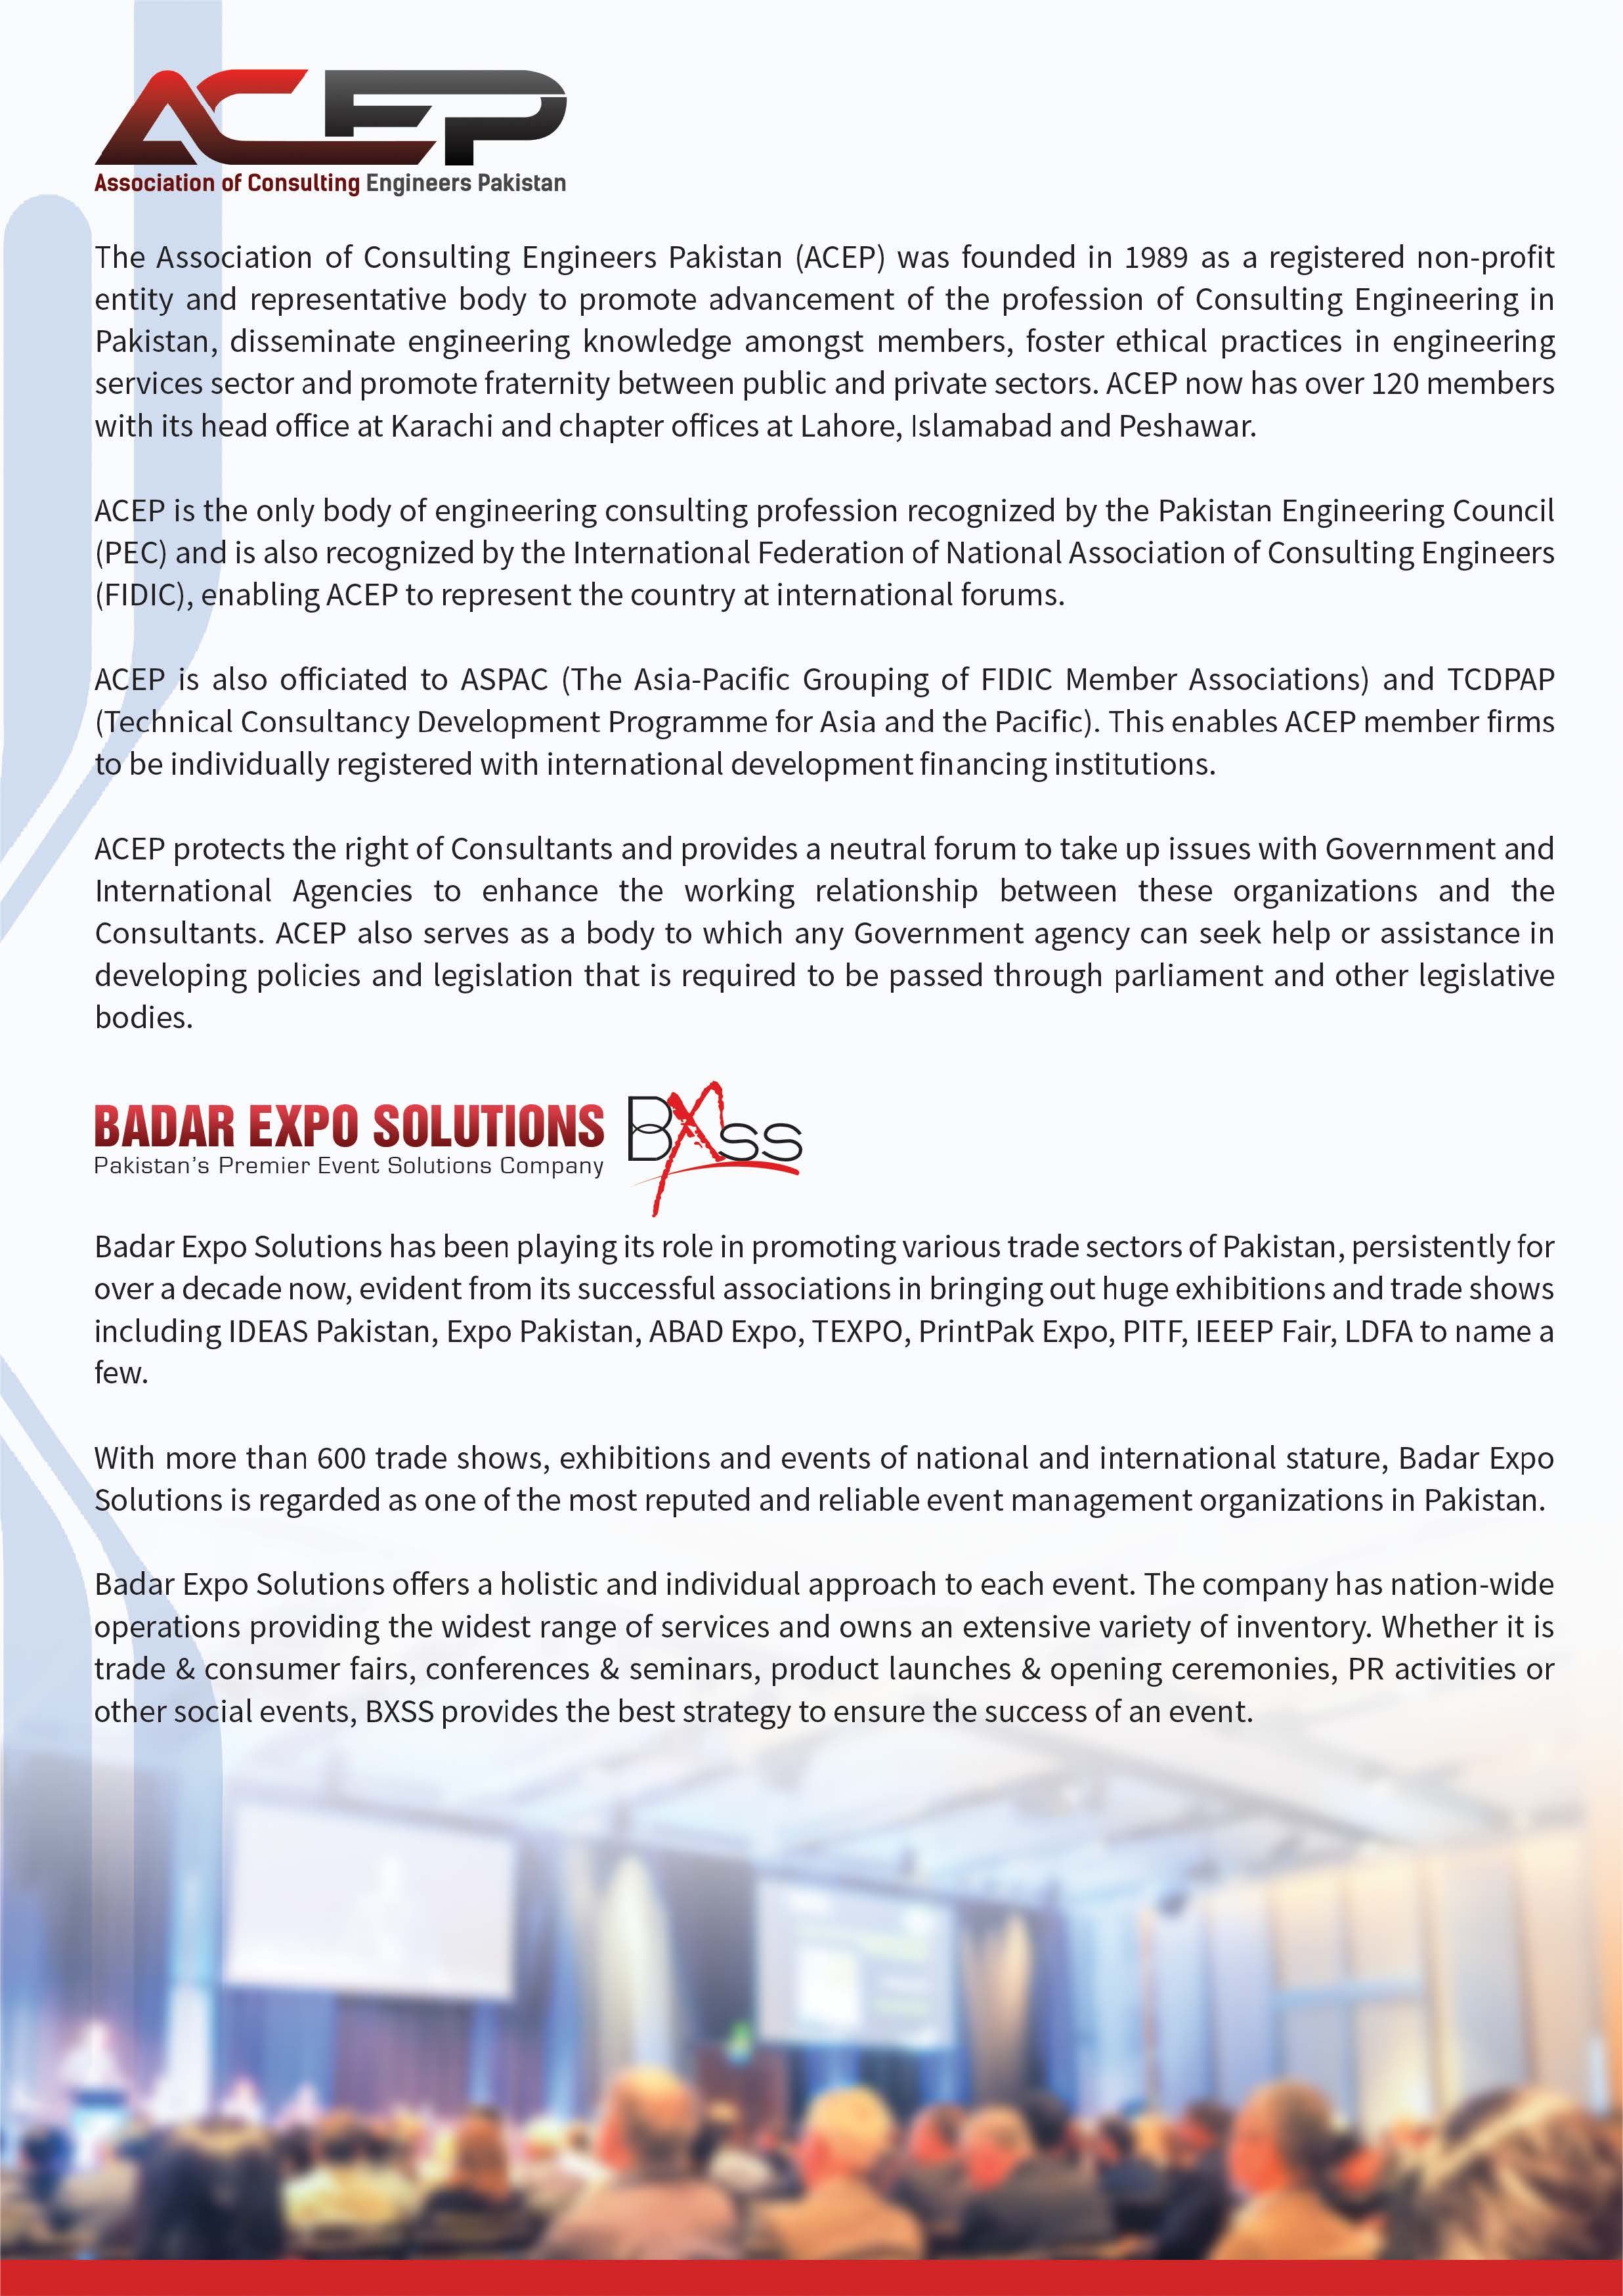 ACEP Conference-2019 brochure_Page_2_Image_0001.jpg